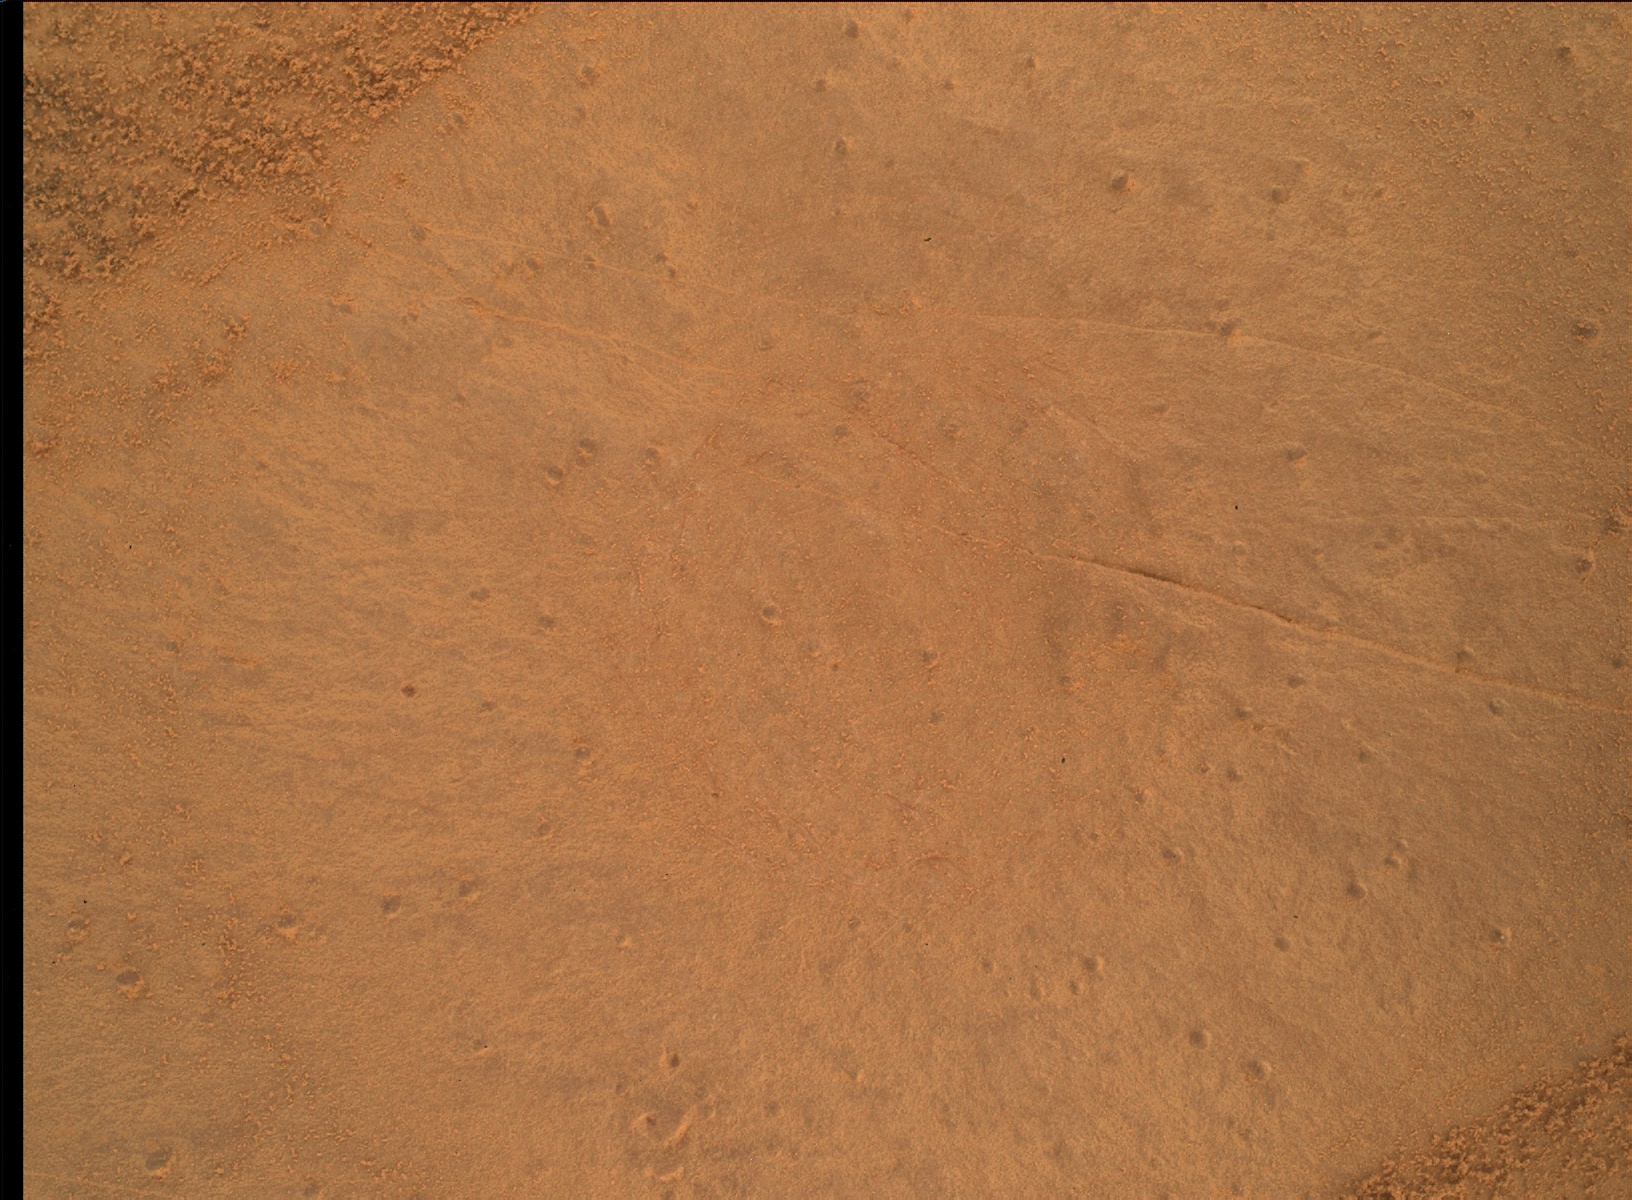 Nasa's Mars rover Curiosity acquired this image using its Mars Hand Lens Imager (MAHLI) on Sol 2134